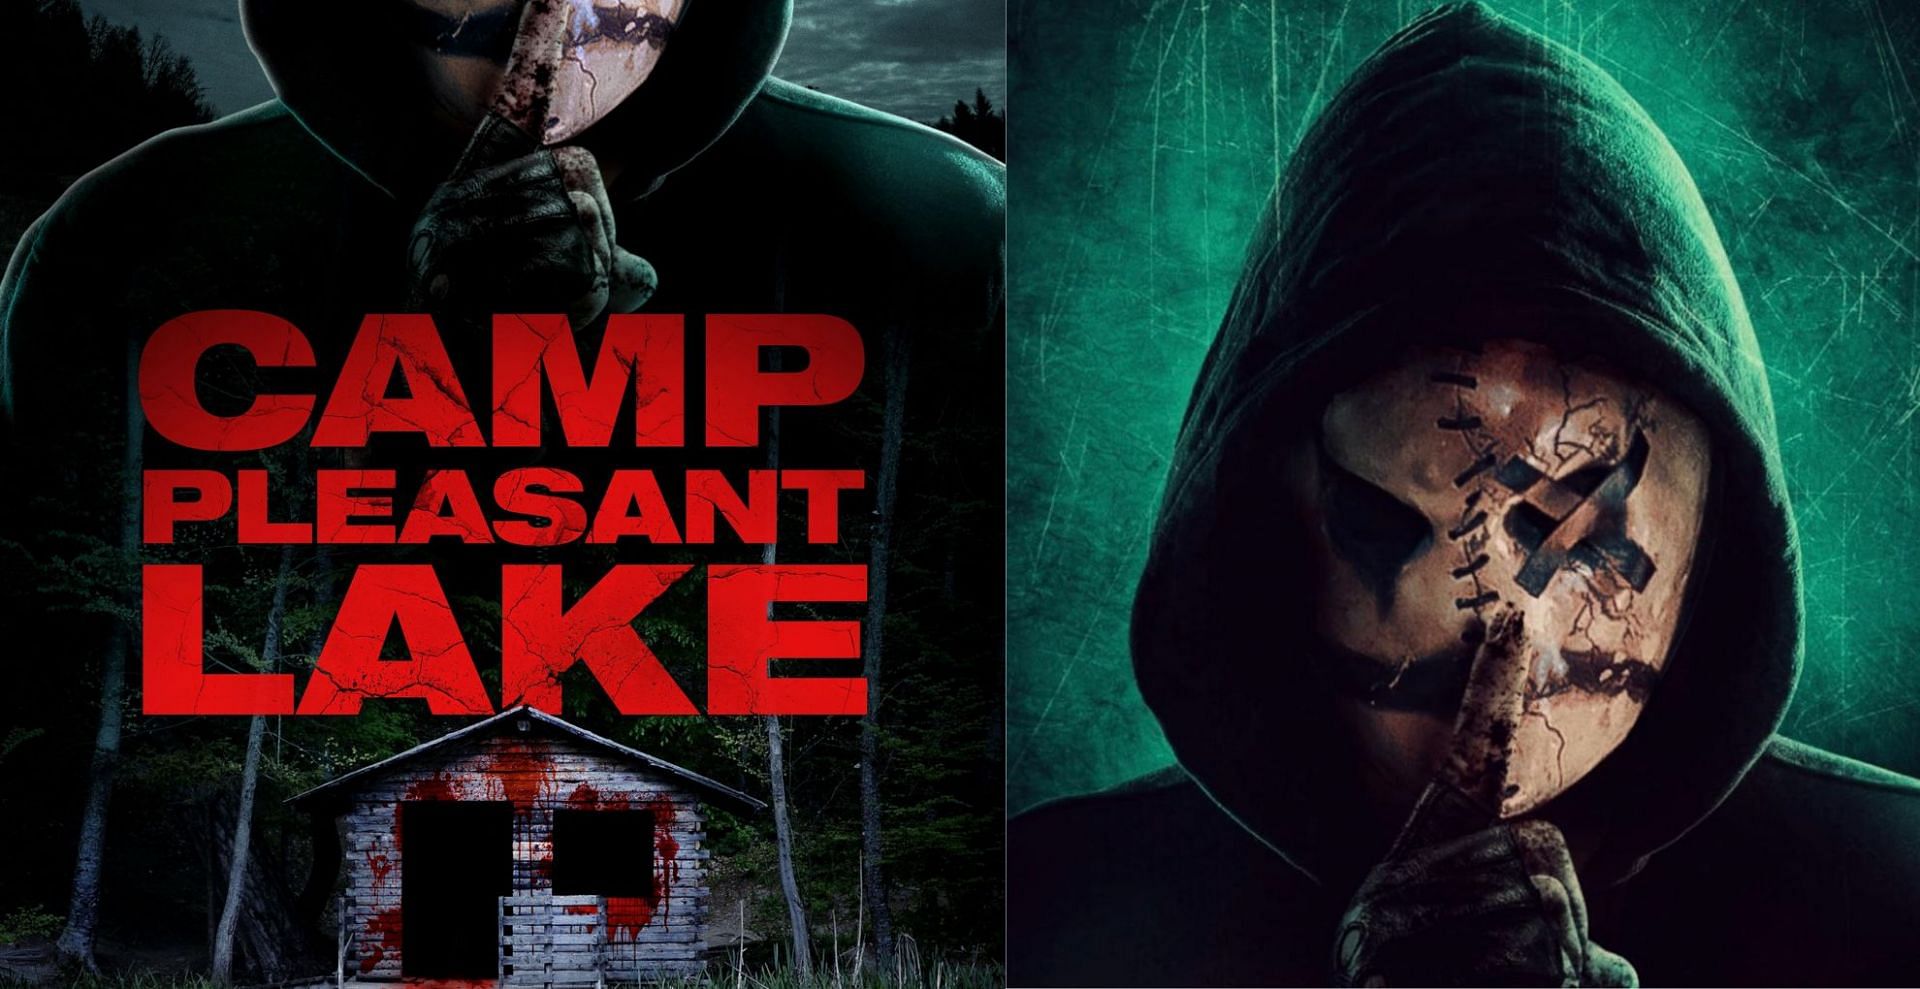 Where to watch Camp Pleasant Lake? Streaming options explored